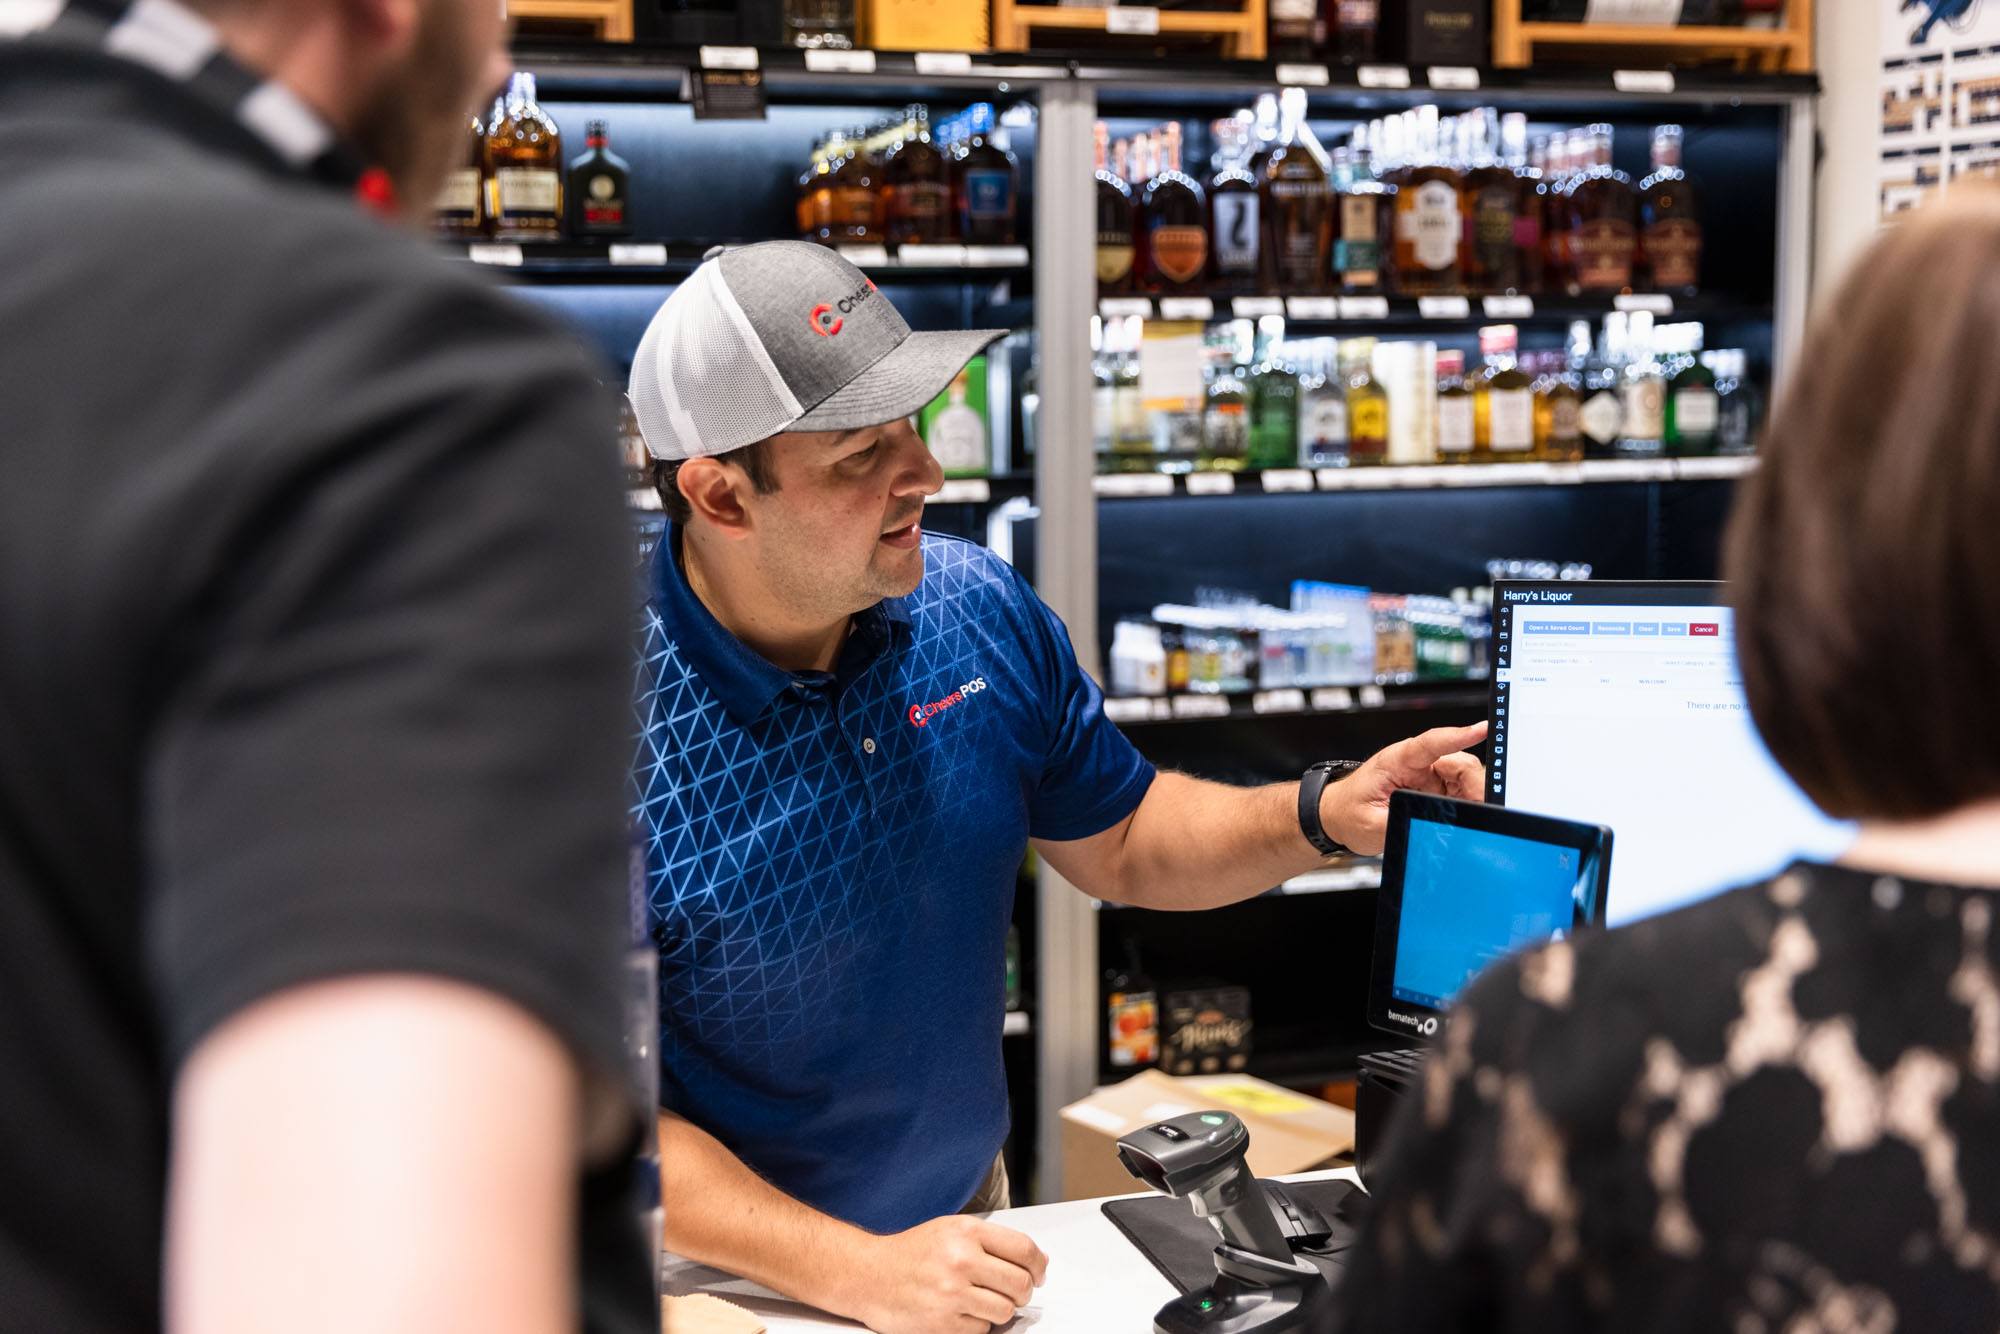 A man greets his customers, who came because of quality liquor store marketing